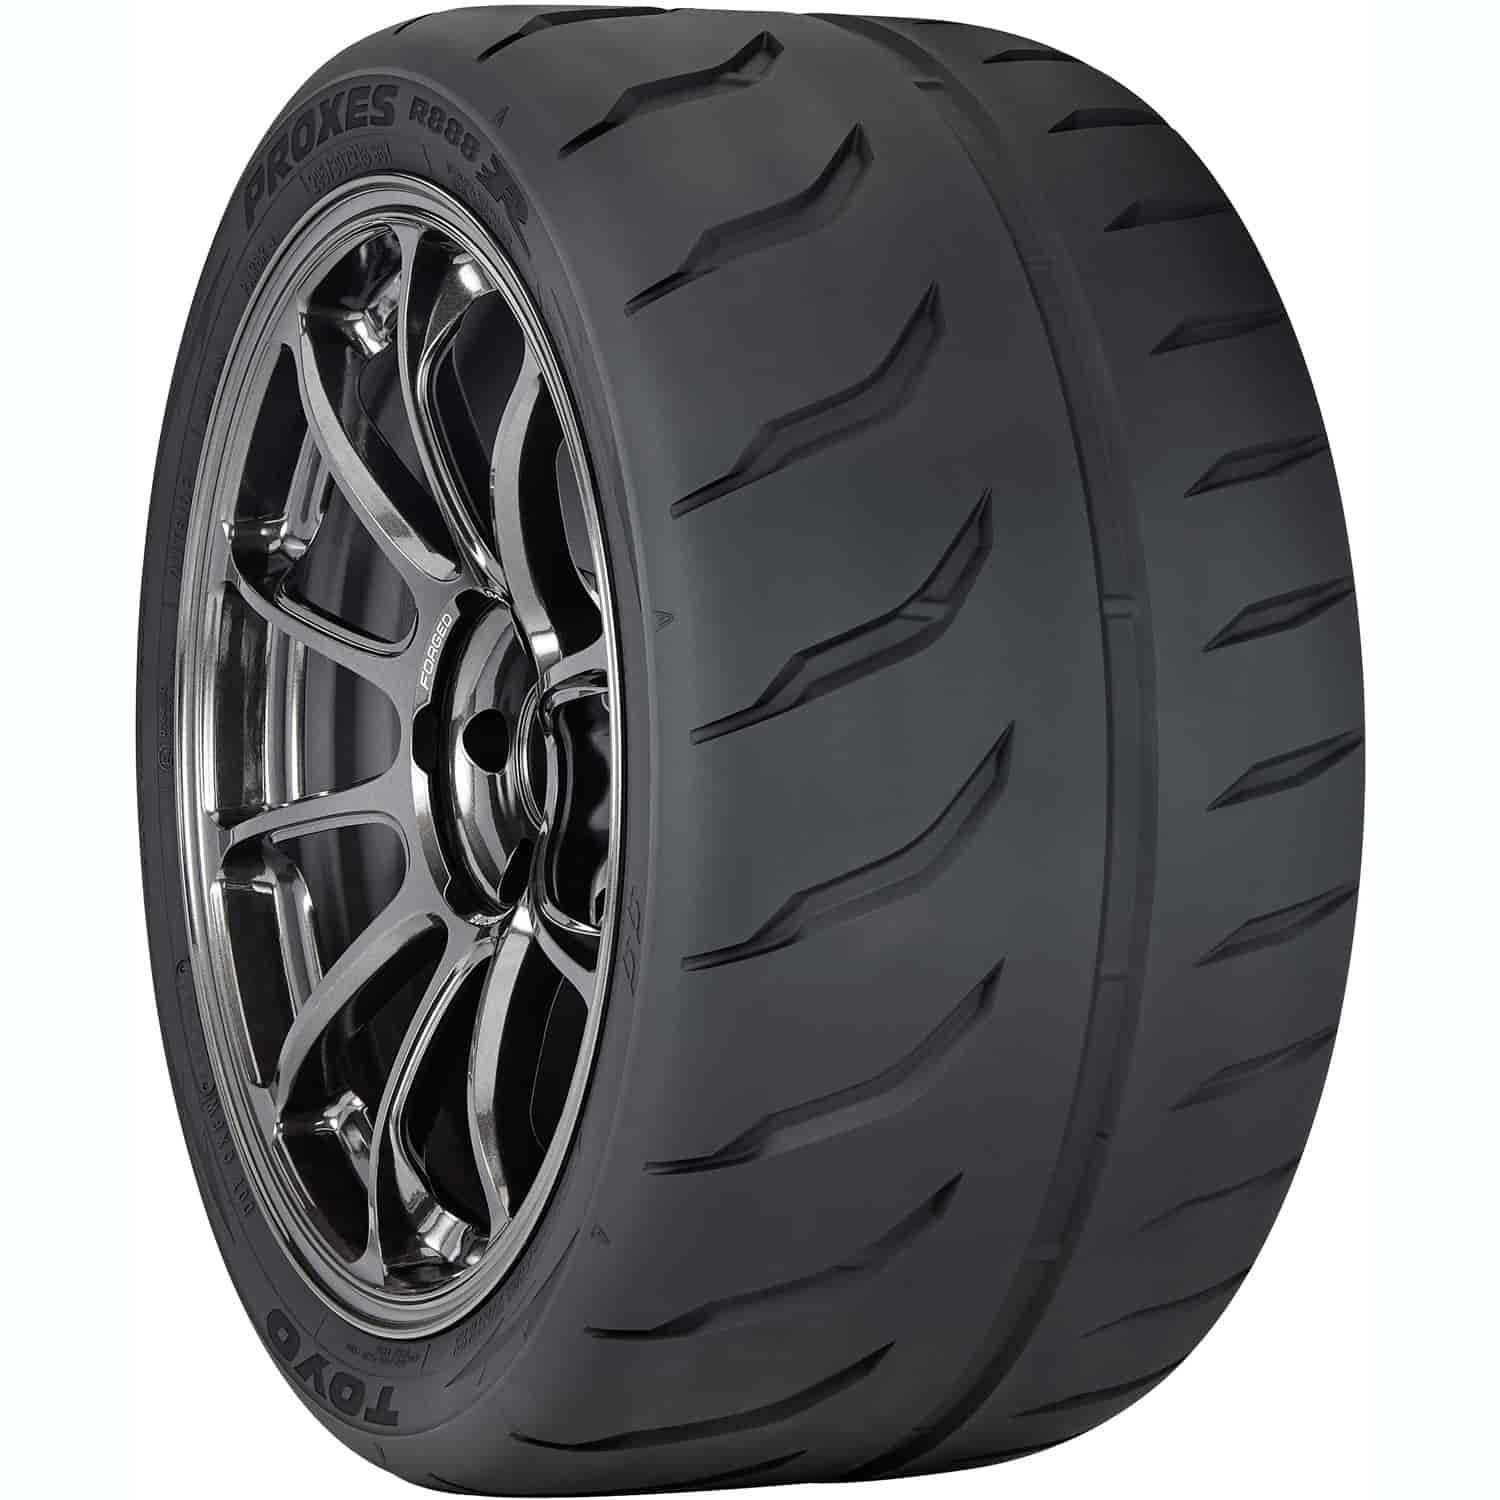 Toyo Tires 102700: Proxes R888R D.O.T. Competition Tire 225/40ZR18 92Y XL  PXR8R TL - JEGS